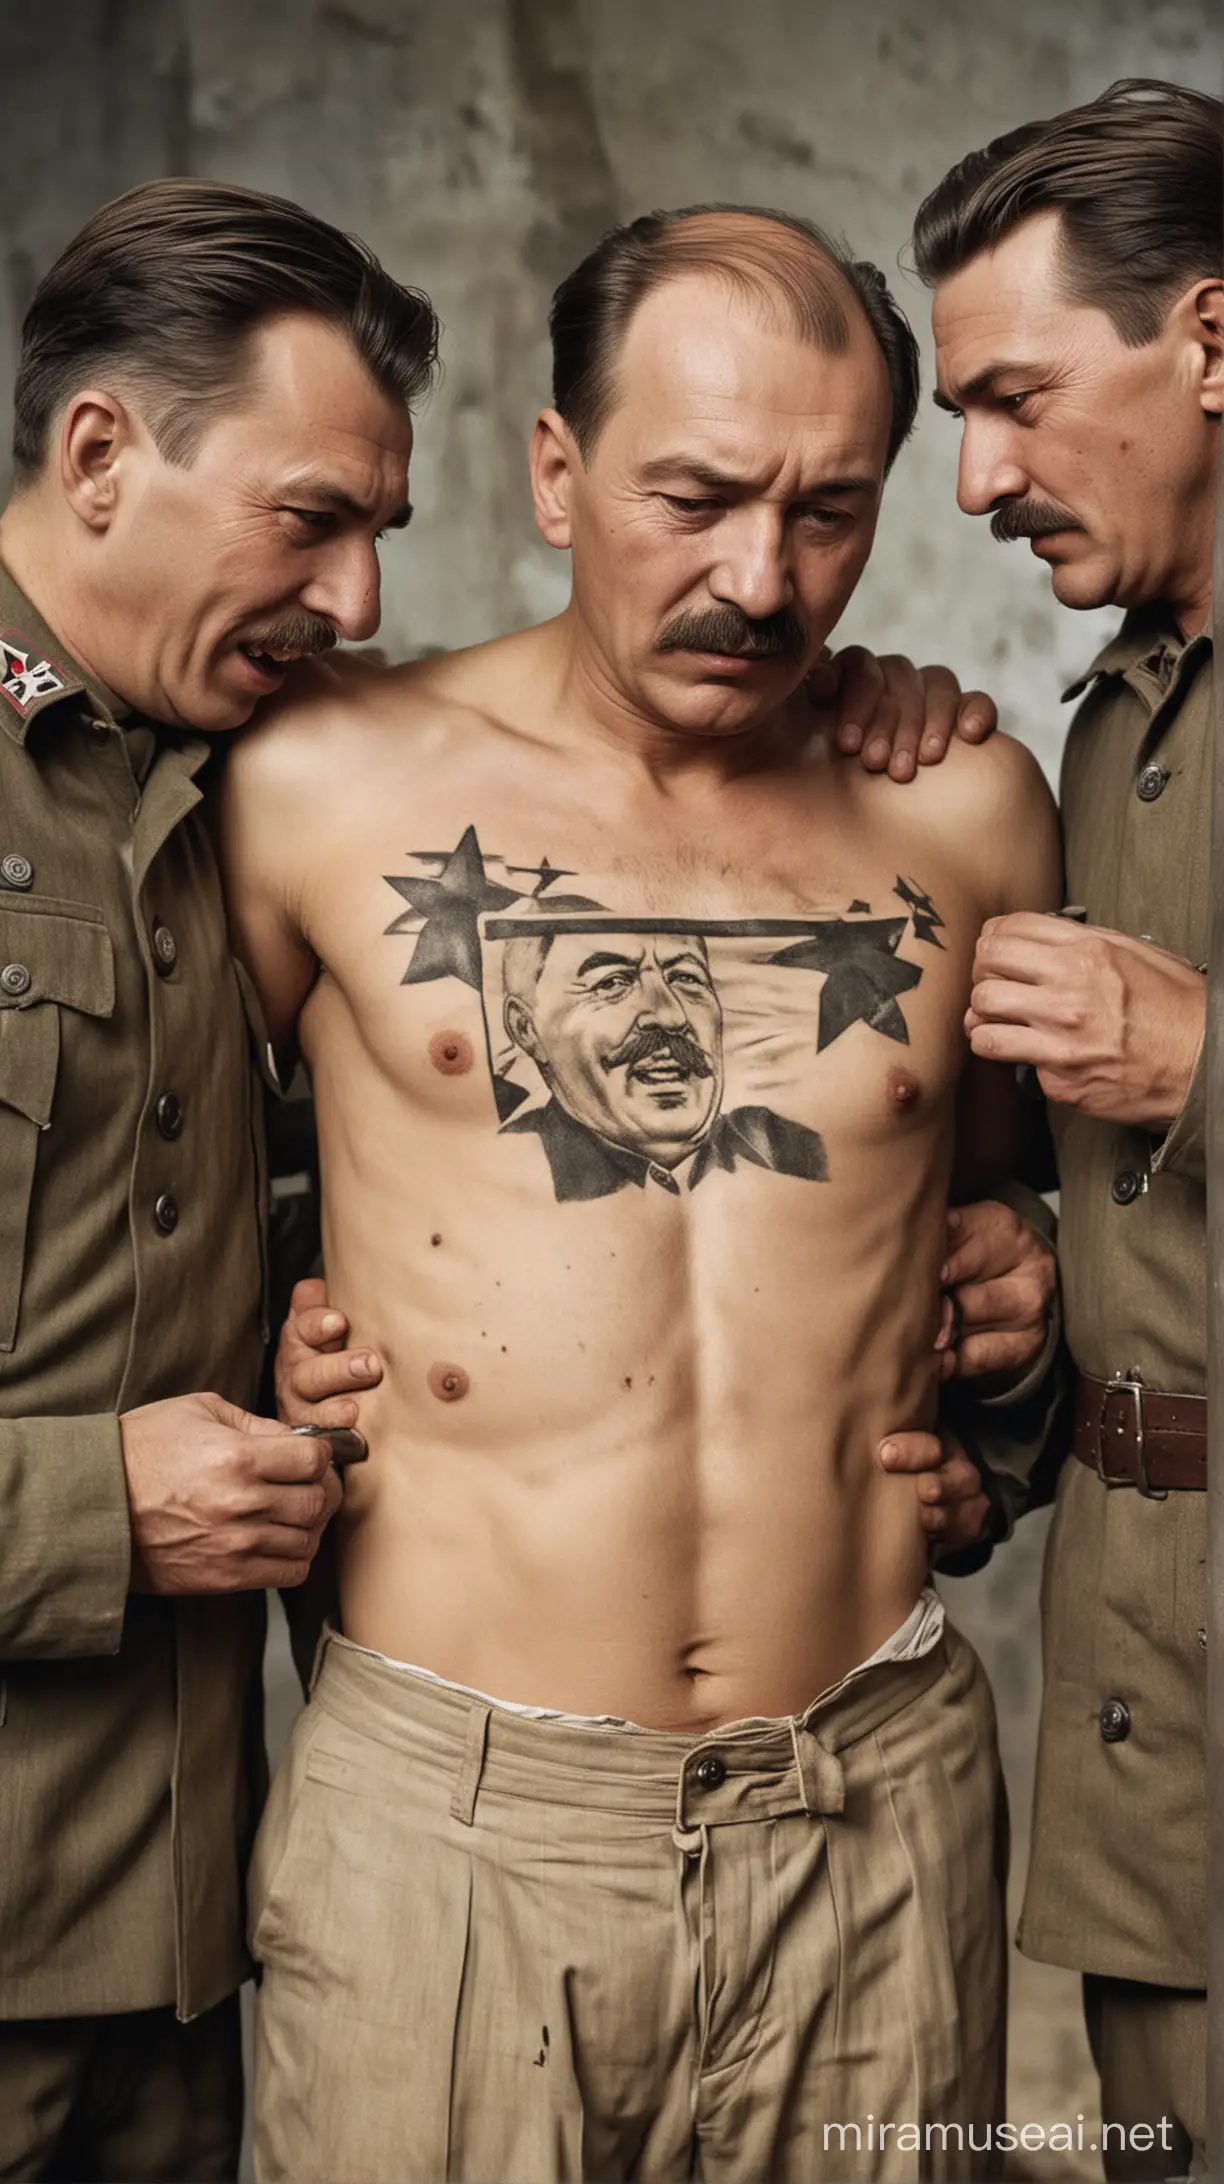 Nazi Soldiers Discover Surprising Tattoo During Prisoner Inspection